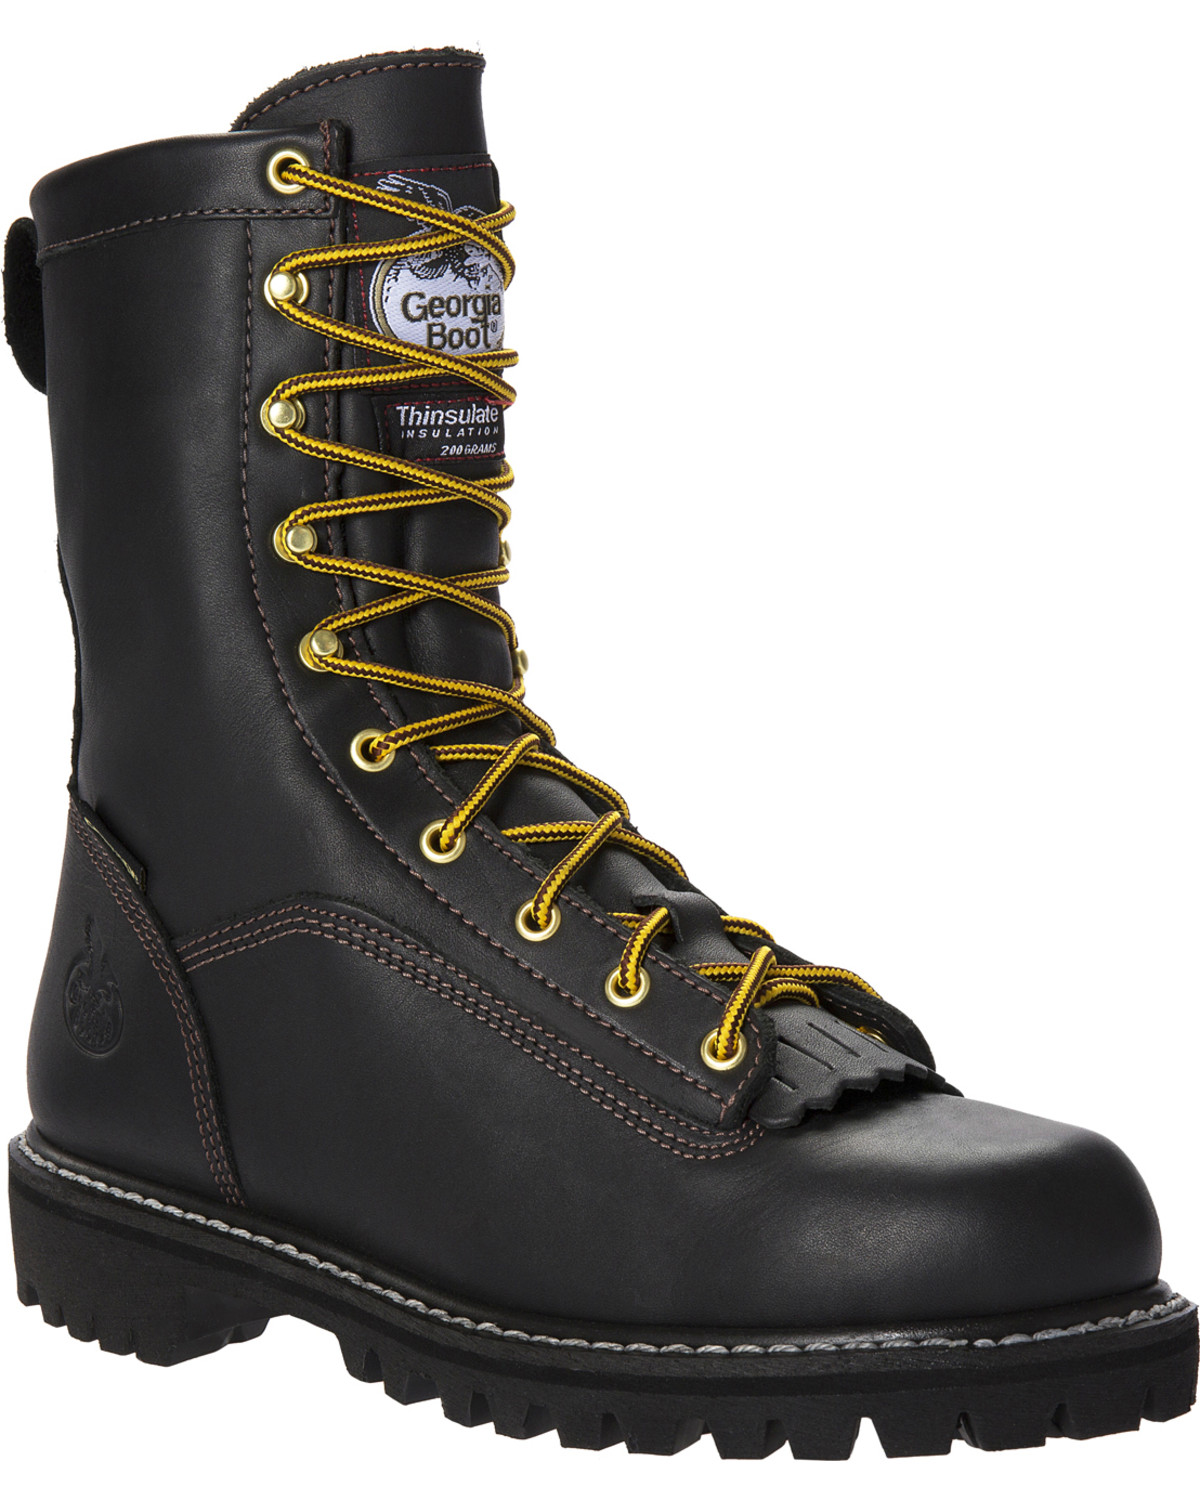 GORE-TEX Insulated Work Boots | Boot Barn